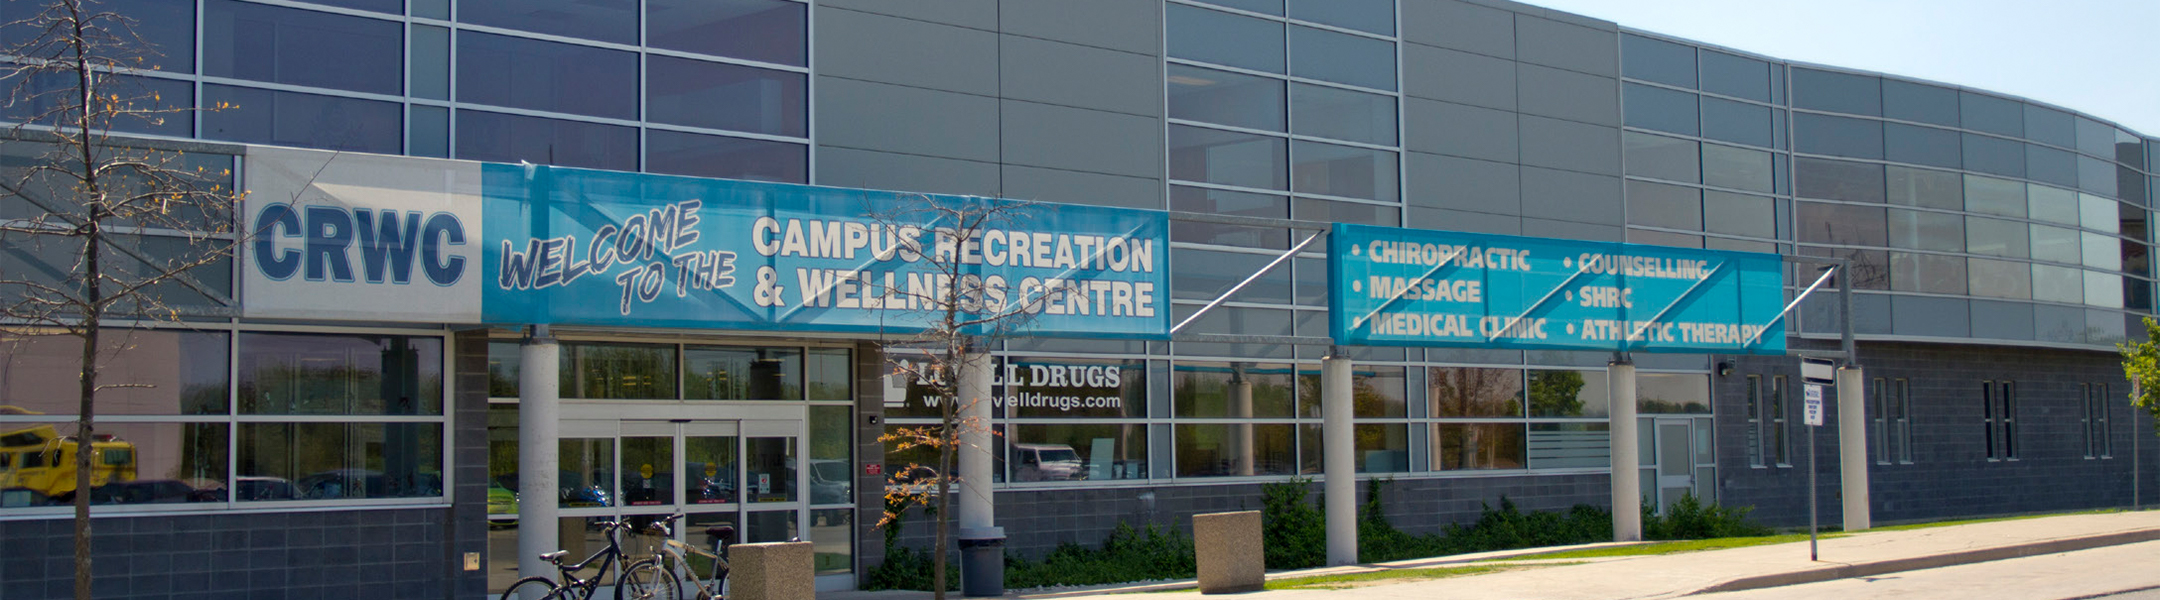 The entrance to the UOIT Campus Recreation and Wellness Centre (CRWC)